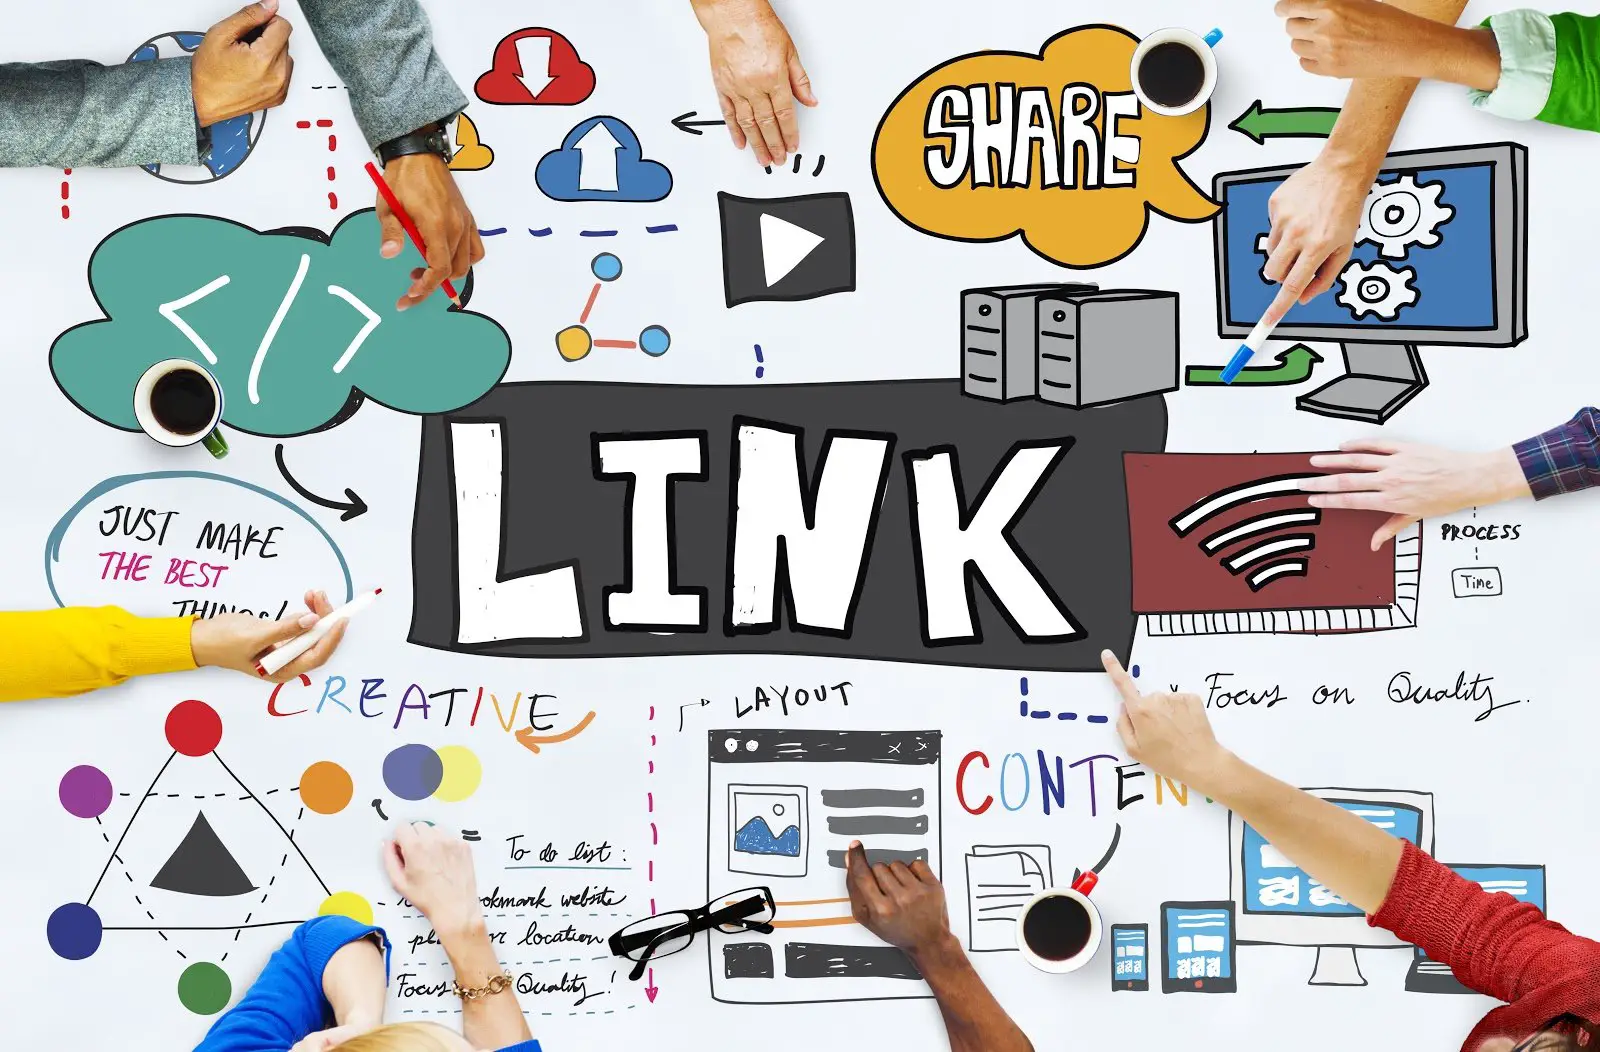 A collage features the word “LINK” surrounded by hands pointing to illustrations, charts, and graphs.